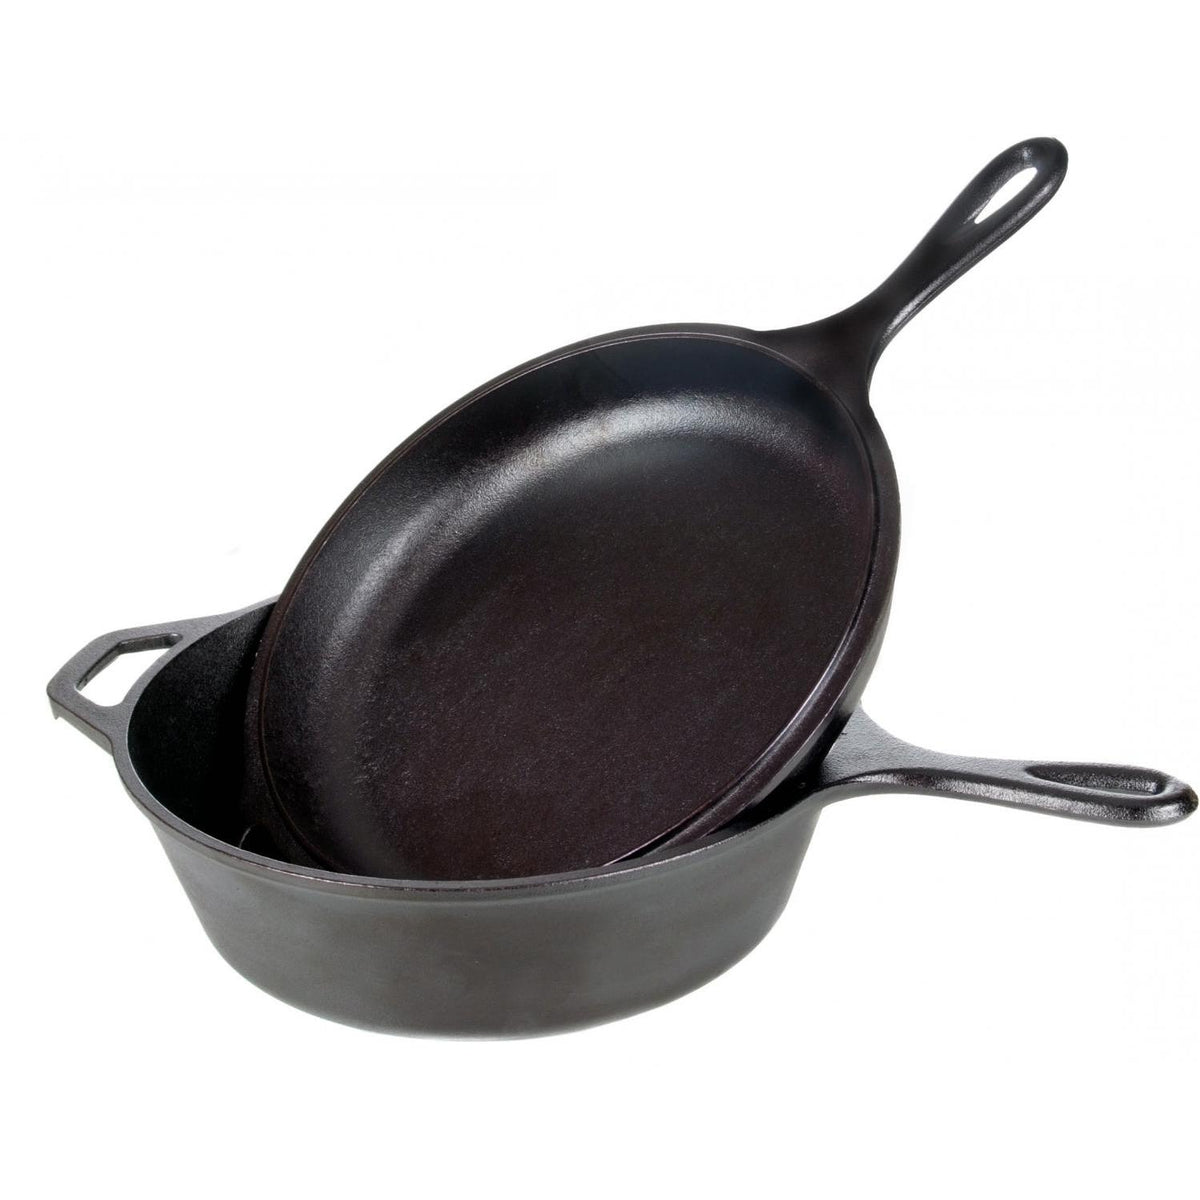 buy cookware sets at cheap rate in bulk. wholesale & retail kitchen tools & supplies store.